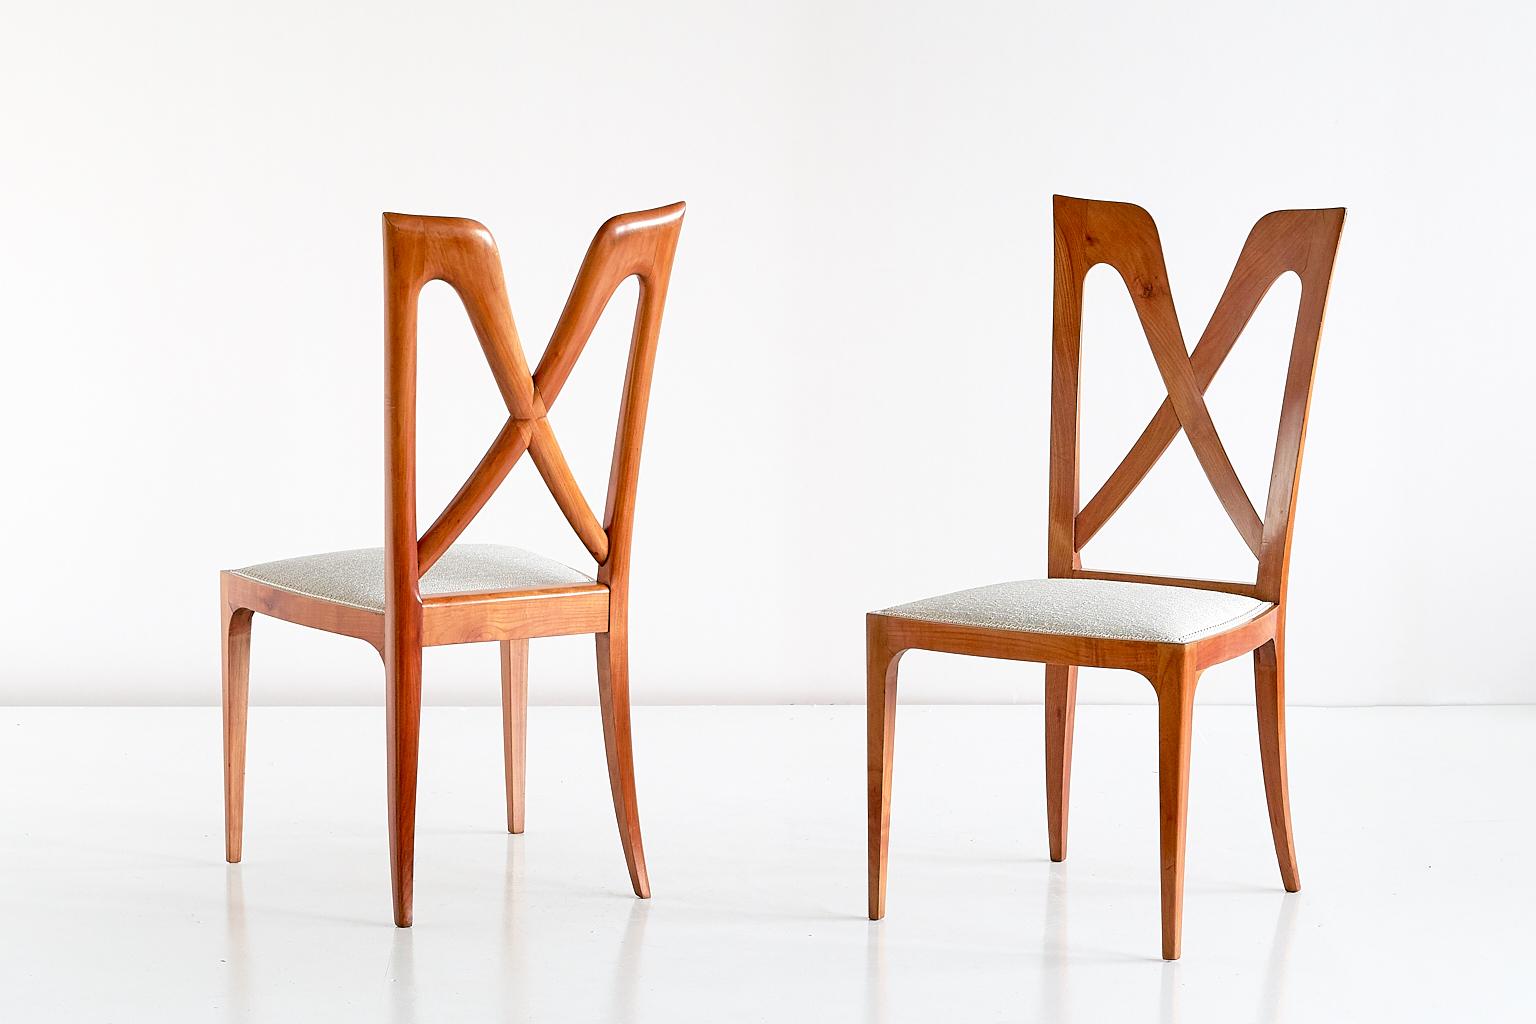 Italian Set of Six Ulderico Carlo Forni Dining Chairs in Cherry Wood, Italy, 1940s For Sale